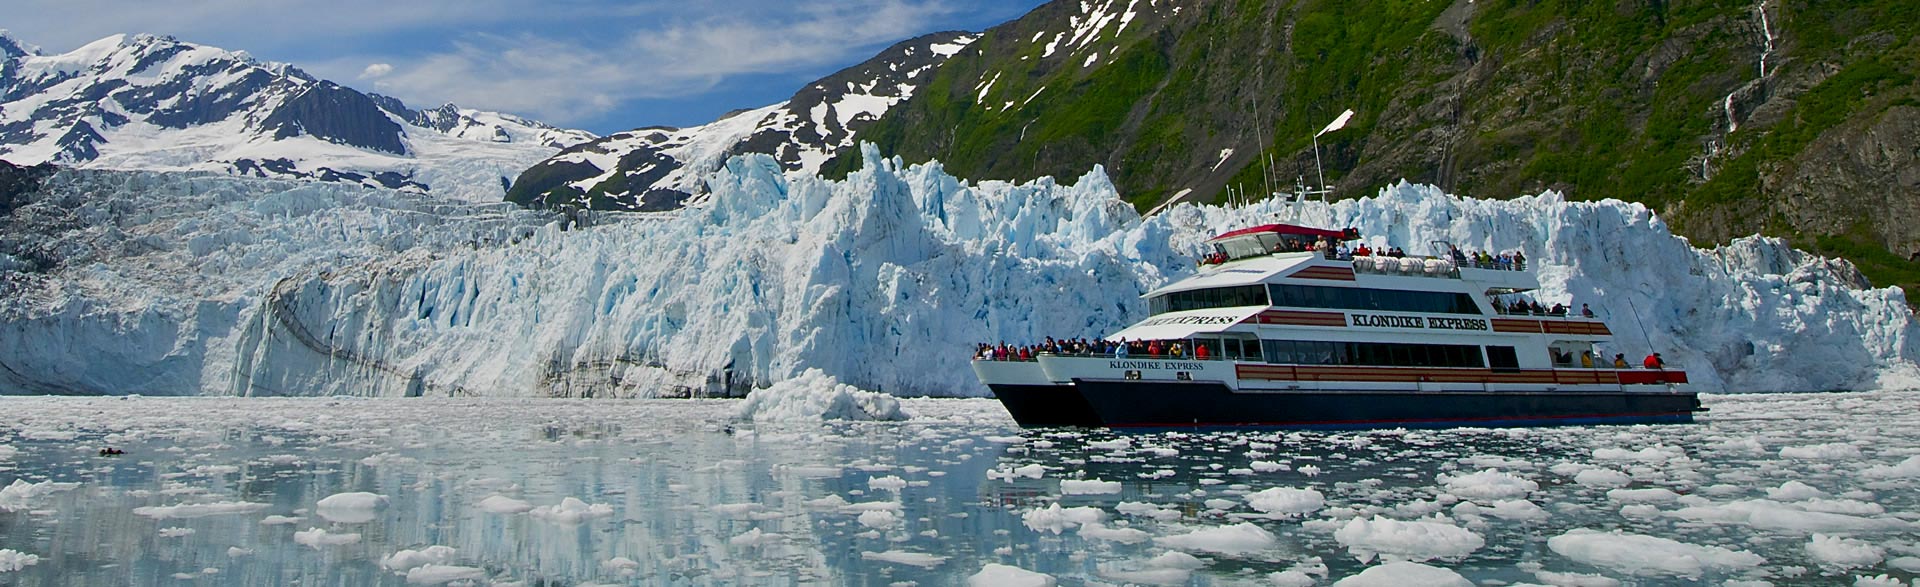 cruise out of whittier alaska